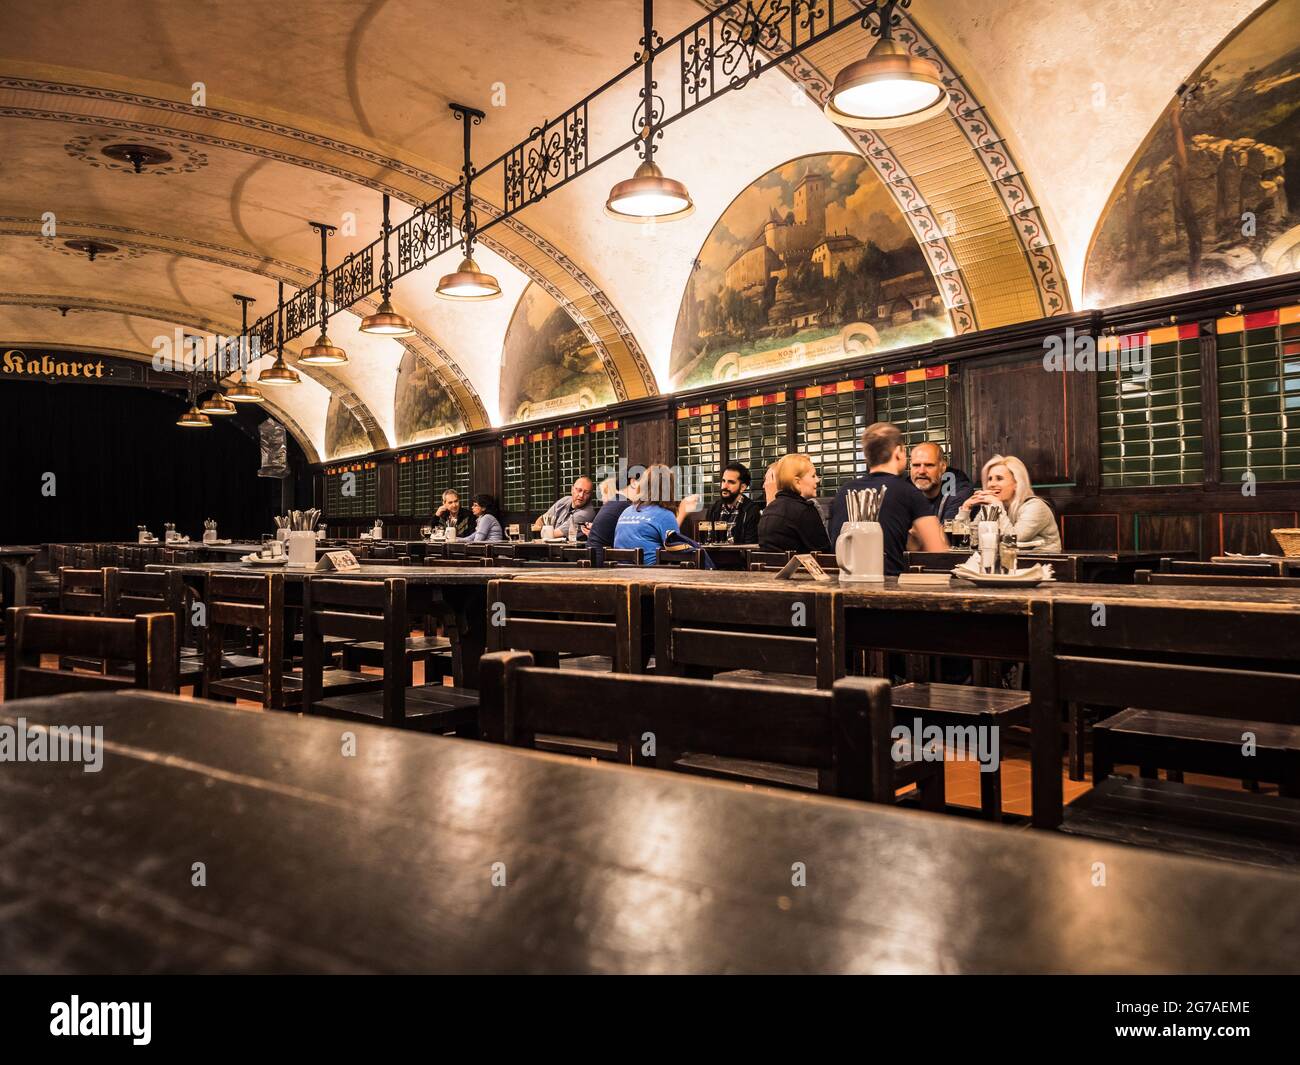 Prague, Czech Republic - July 2 2021: U Fleku Brewery Beer Hall and Restaurant Interior with Guests. Stock Photo